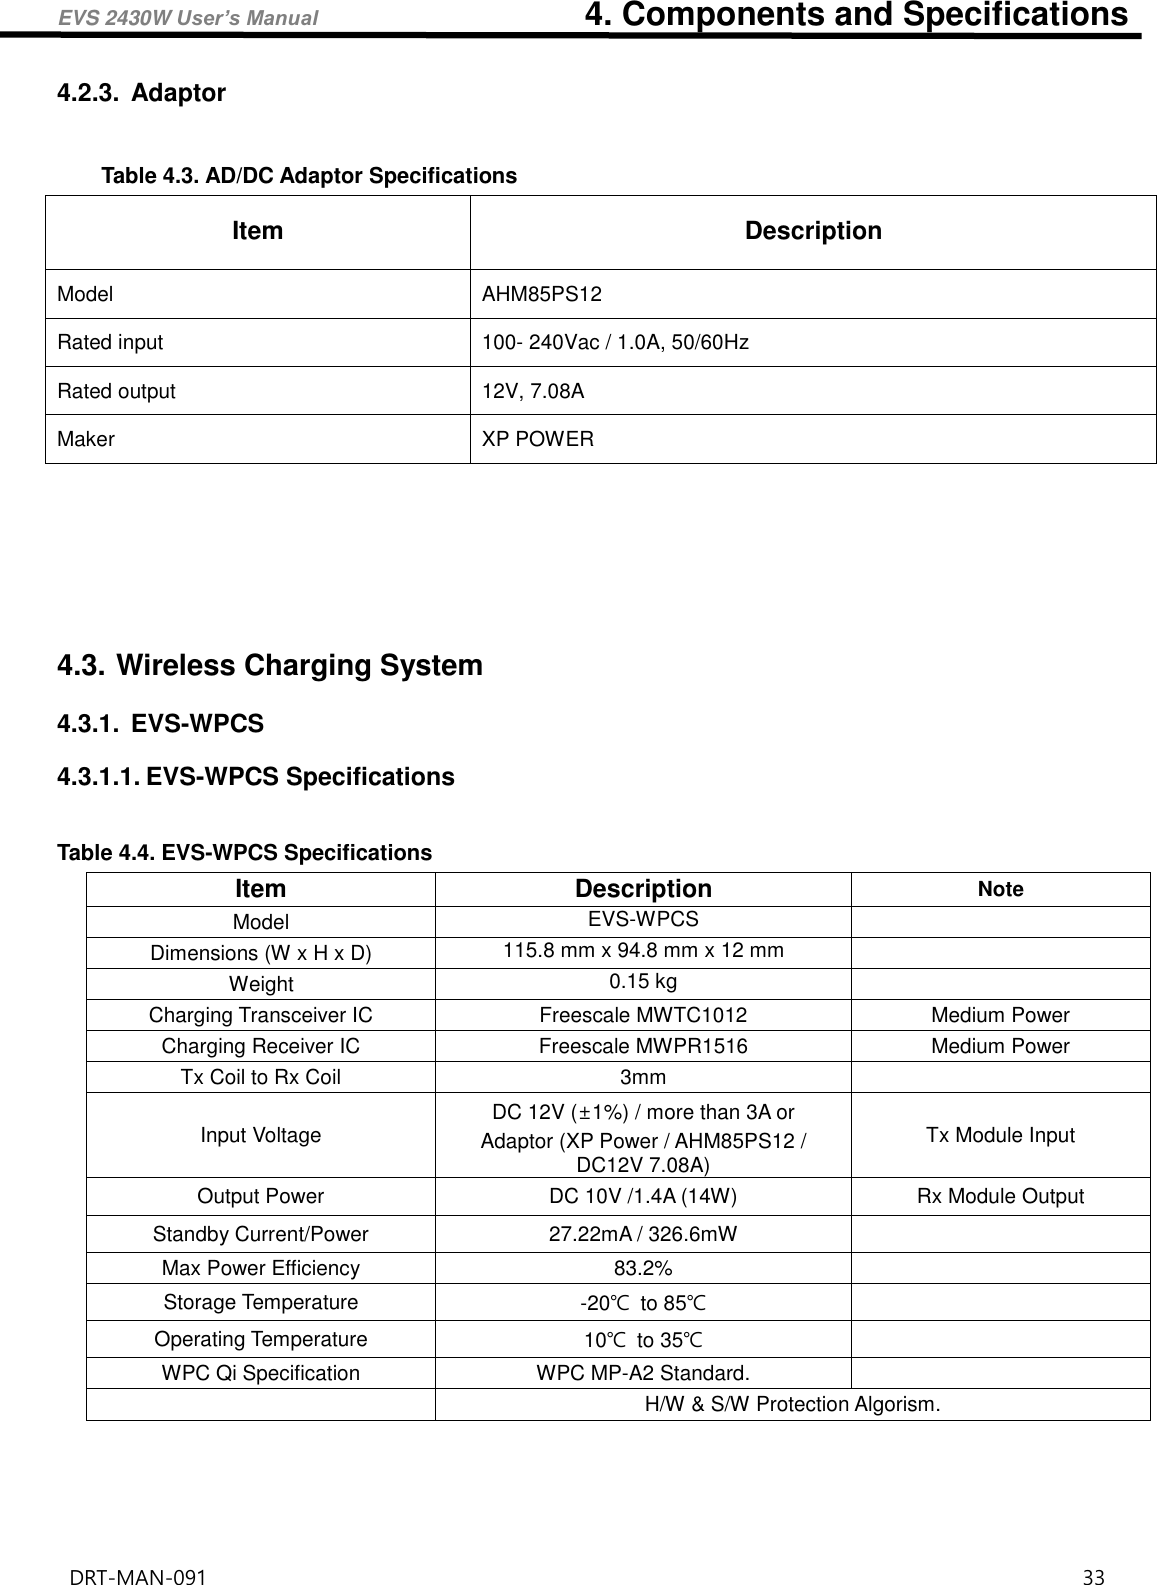 EVS 2430W User’s Manual                                4. Components and Specifications DRT-MAN-091                                                                                    33   4.2.3.  Adaptor  Table 4.3. AD/DC Adaptor Specifications Item Description Model AHM85PS12 Rated input 100- 240Vac / 1.0A, 50/60Hz Rated output 12V, 7.08A Maker XP POWER     4.3. Wireless Charging System 4.3.1.  EVS-WPCS 4.3.1.1. EVS-WPCS Specifications  Table 4.4. EVS-WPCS Specifications Item Description Note Model EVS-WPCS  Dimensions (W x H x D) 115.8 mm x 94.8 mm x 12 mm  Weight 0.15 kg  Charging Transceiver IC Freescale MWTC1012 Medium Power Charging Receiver IC Freescale MWPR1516 Medium Power Tx Coil to Rx Coil 3mm  Input Voltage DC 12V (±1%) / more than 3A or Adaptor (XP Power / AHM85PS12 / DC12V 7.08A) Tx Module Input Output Power DC 10V /1.4A (14W) Rx Module Output Standby Current/Power 27.22mA / 326.6mW  Max Power Efficiency 83.2%  Storage Temperature -20℃ to 85℃  Operating Temperature 10℃ to 35℃  WPC Qi Specification WPC MP-A2 Standard.   H/W &amp; S/W Protection Algorism.      